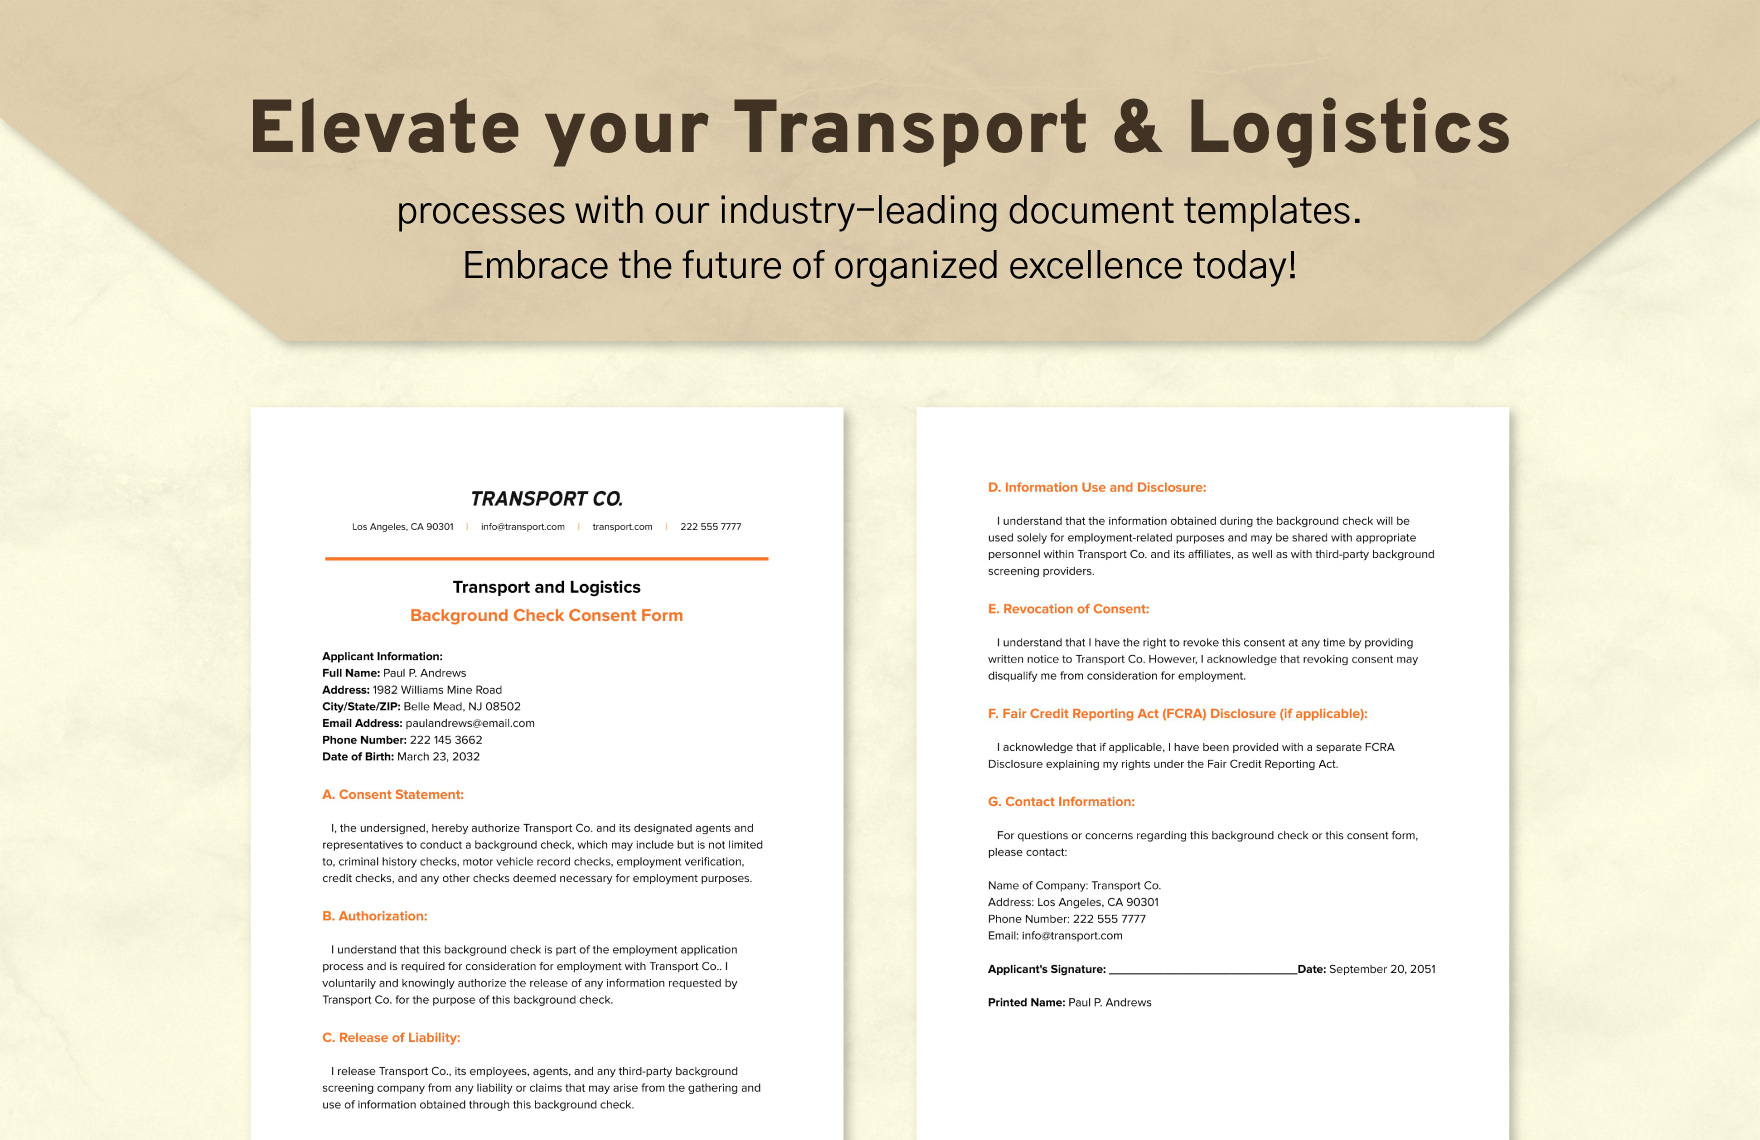 Transport and Logistics Background Check Consent Form Template